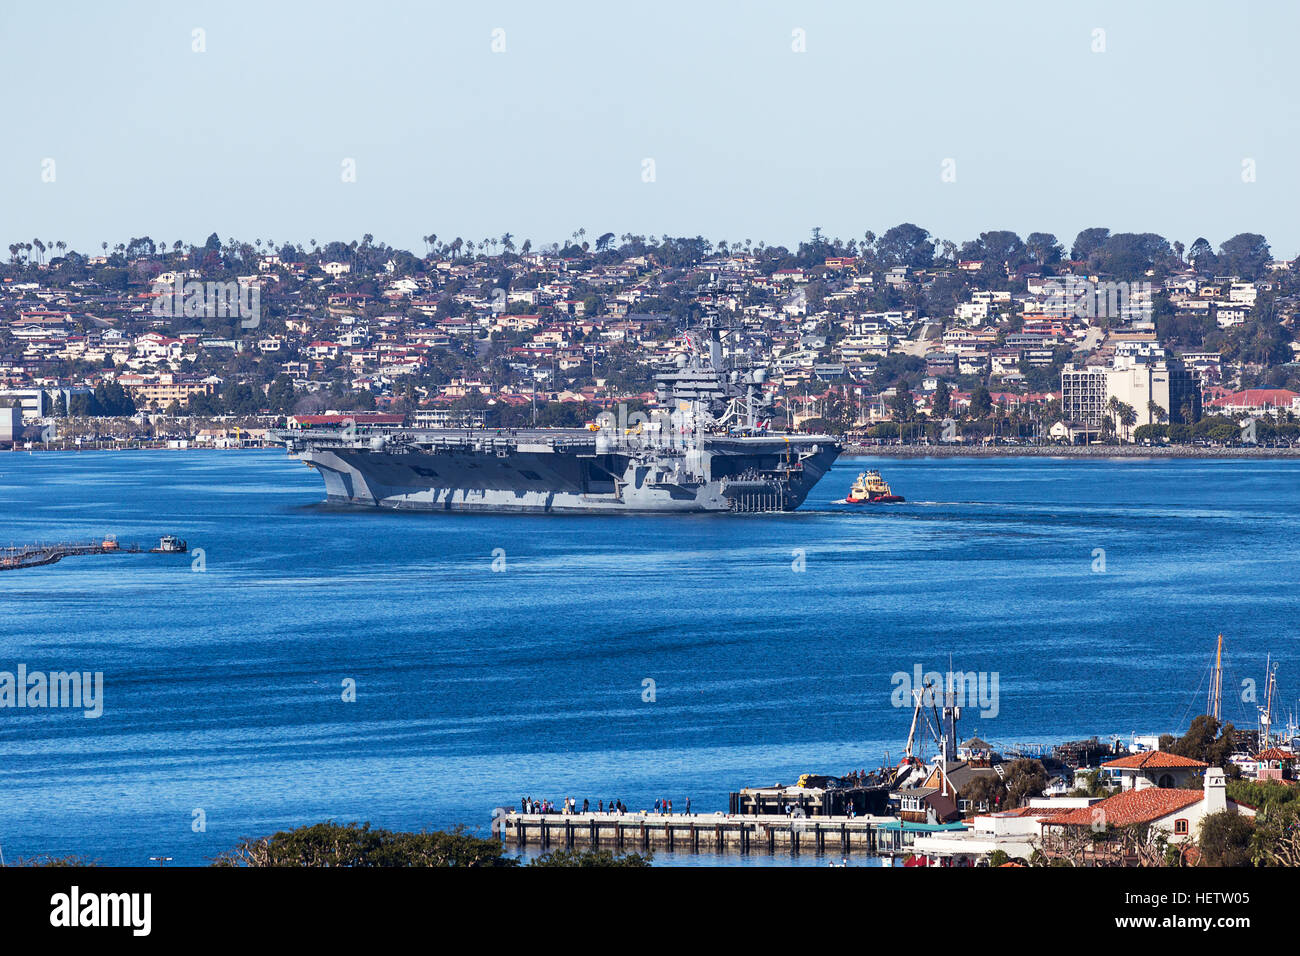 San Diego, USA. 19th December, 2016. The United States aircraft carrier USS Theodore Roosevelt departs from San Diego Bay Stock Photo